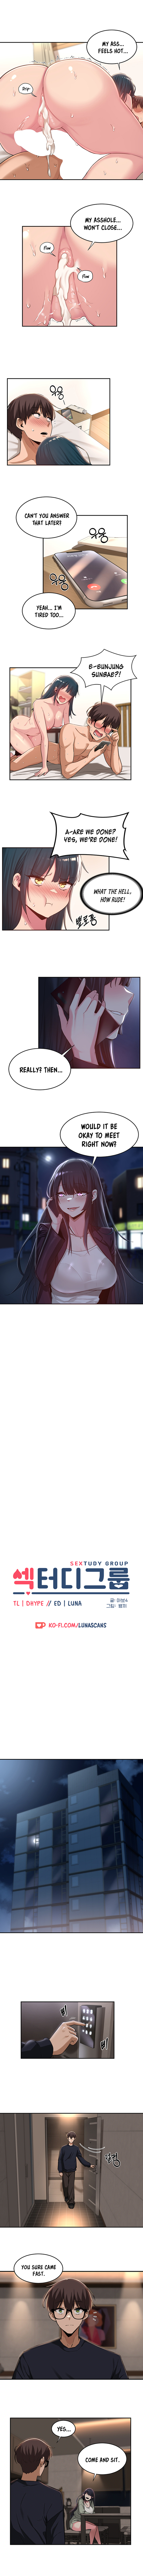 Panel Image 1 for chapter 23 of manhwa Sex Study Group on read.oppai.stream